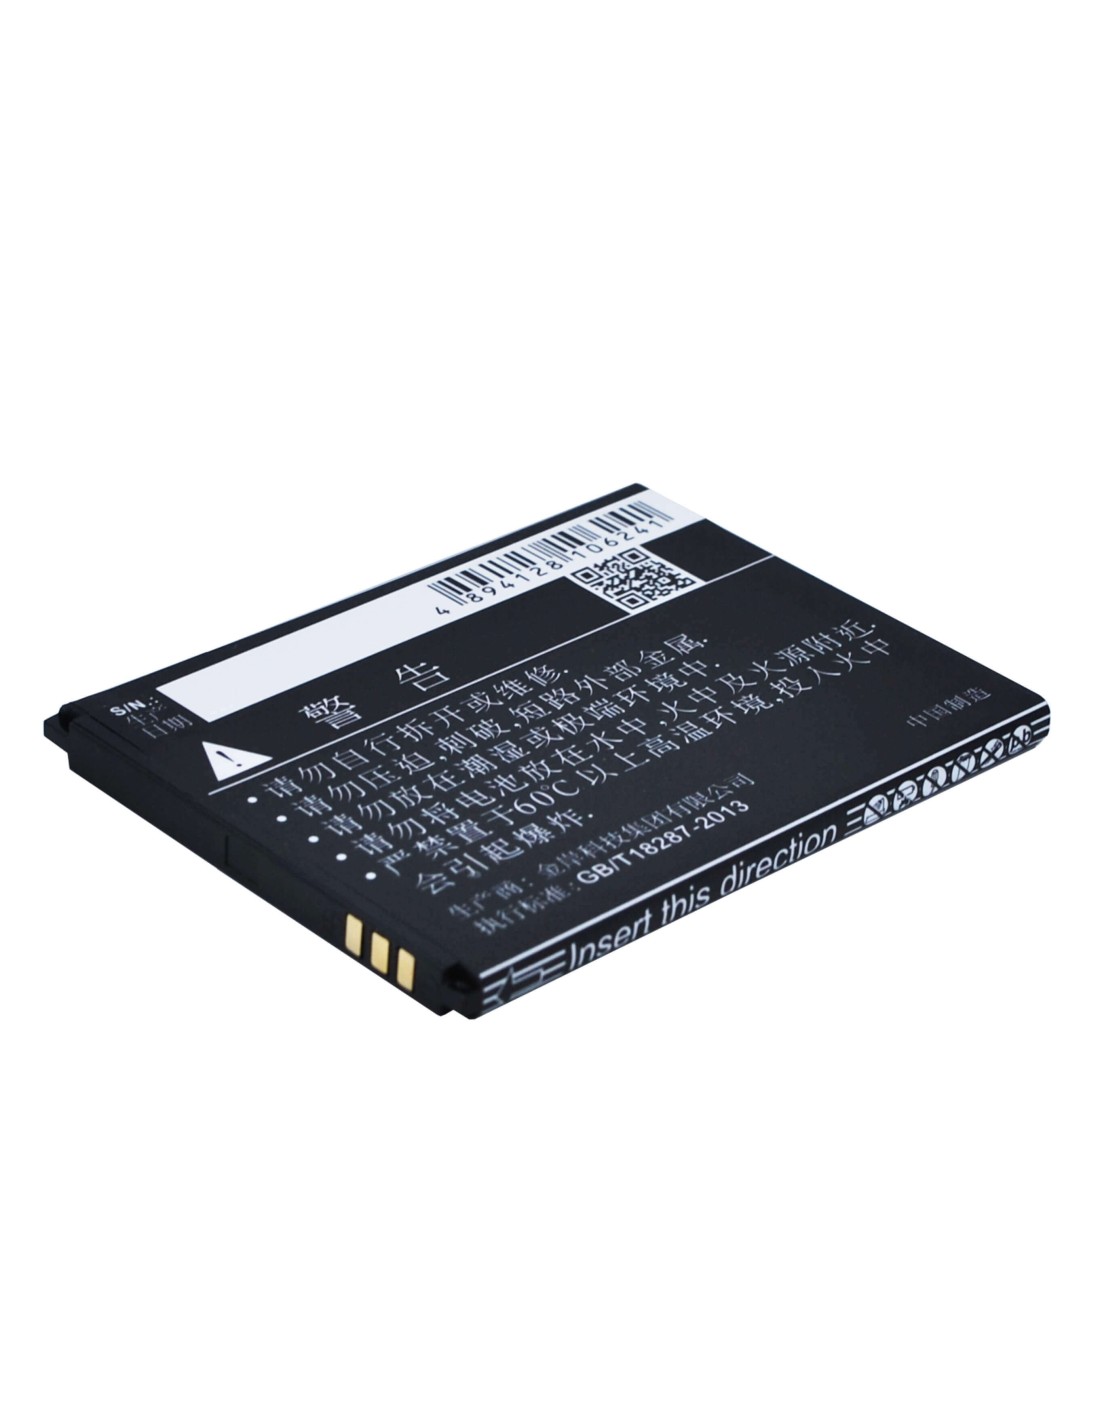 Battery for Coolpad 8707 3.7V, 1500mAh - 5.55Wh